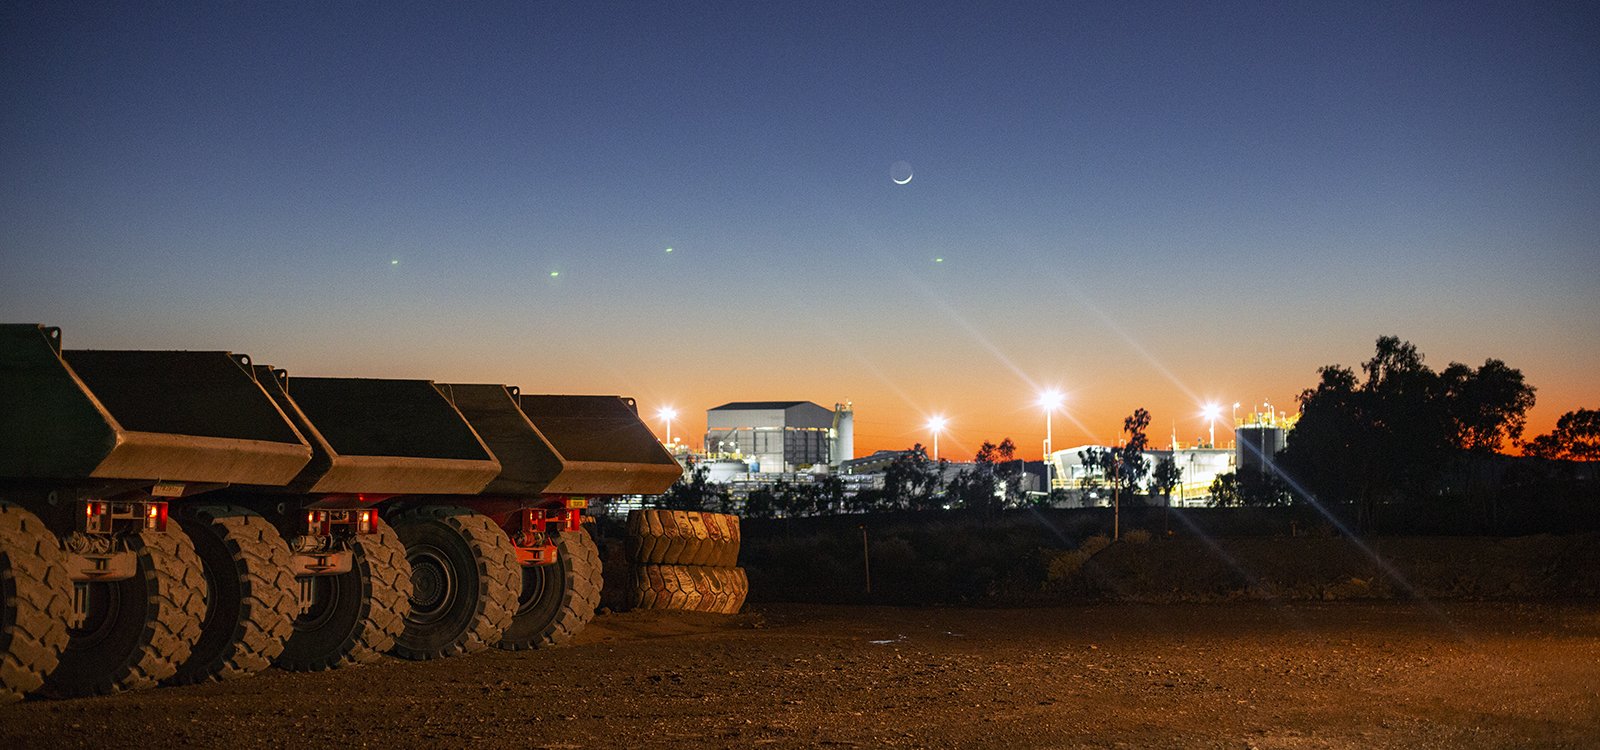 The sun rises over MMG’s Dugald River mine – one of the world’s largest known zinc deposits.